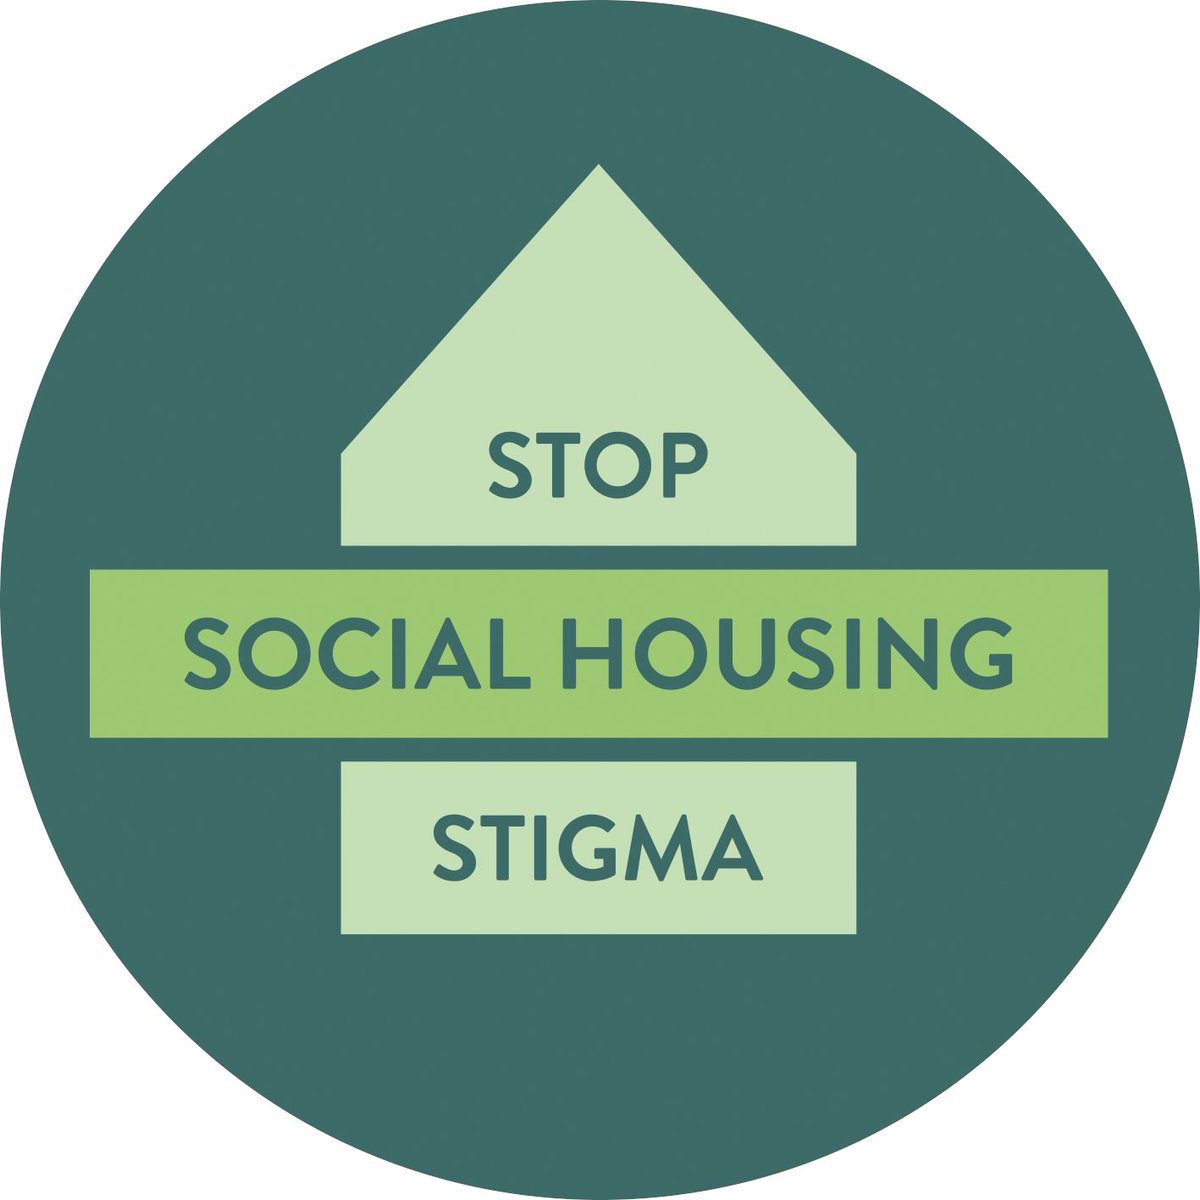 Pam Hankinson from #Stopsocialhousingstigma will be speaking at Chartered Institute of Housing, Housing 2023 Conference at #Manchester Central if you see her say hello #Housing2023 #SocialHousing #Stigma 
@Housing _Event